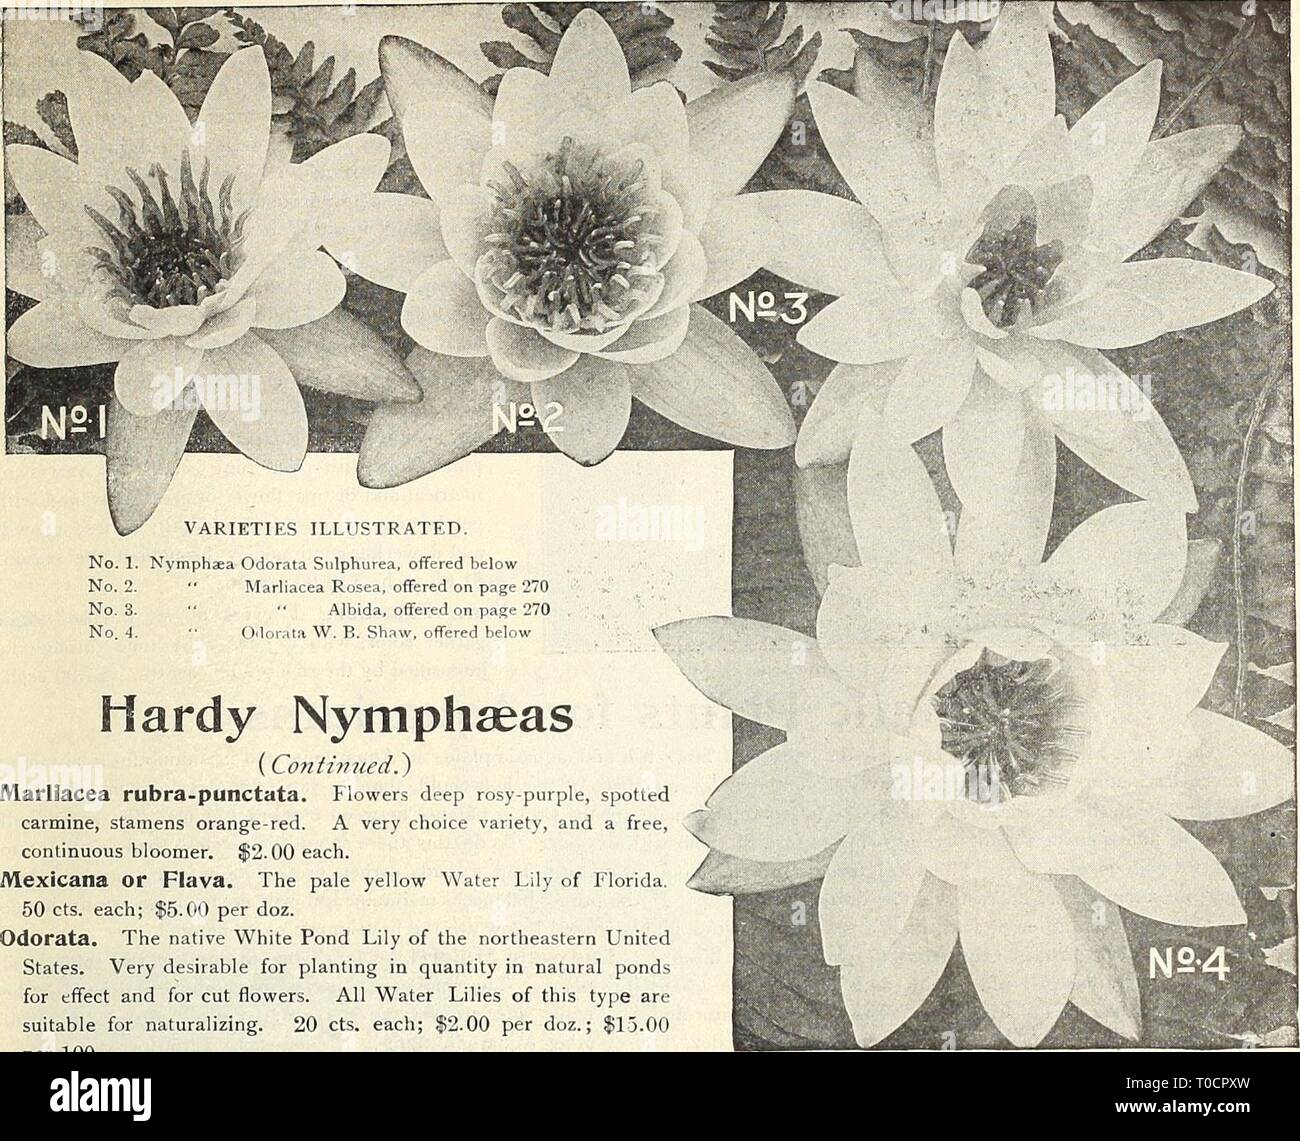 Dreer's garden book 1916 (1916) Dreer's garden book 1916 dreersgardenbook1916henr Year: 1916  HWADREER MADELPHIA-lA-ISf WATER HUES*â¢ AQUATICS-1 271    No. 1. Nymphaea Odorata Sulphurea, offered below No. 2. ' Marliacea Rosea, offered on page 270 No. 3. ' ' Alb'ida, offered on page 270 No. 4. ' Odorata W. B. Shaw, offered below Hardy Nymphseas (Confzmied.) Marliacea rubra-punctata. Flowers deep rosy-purple, spotted carmine, stamens orange-red. A very choice variety, and a free, continuous bloomer. $2.00 each. Mexicana or Flava. The pale yellow Water Lily of Florida. 50 cts. each; $5.00 per doz Stock Photo